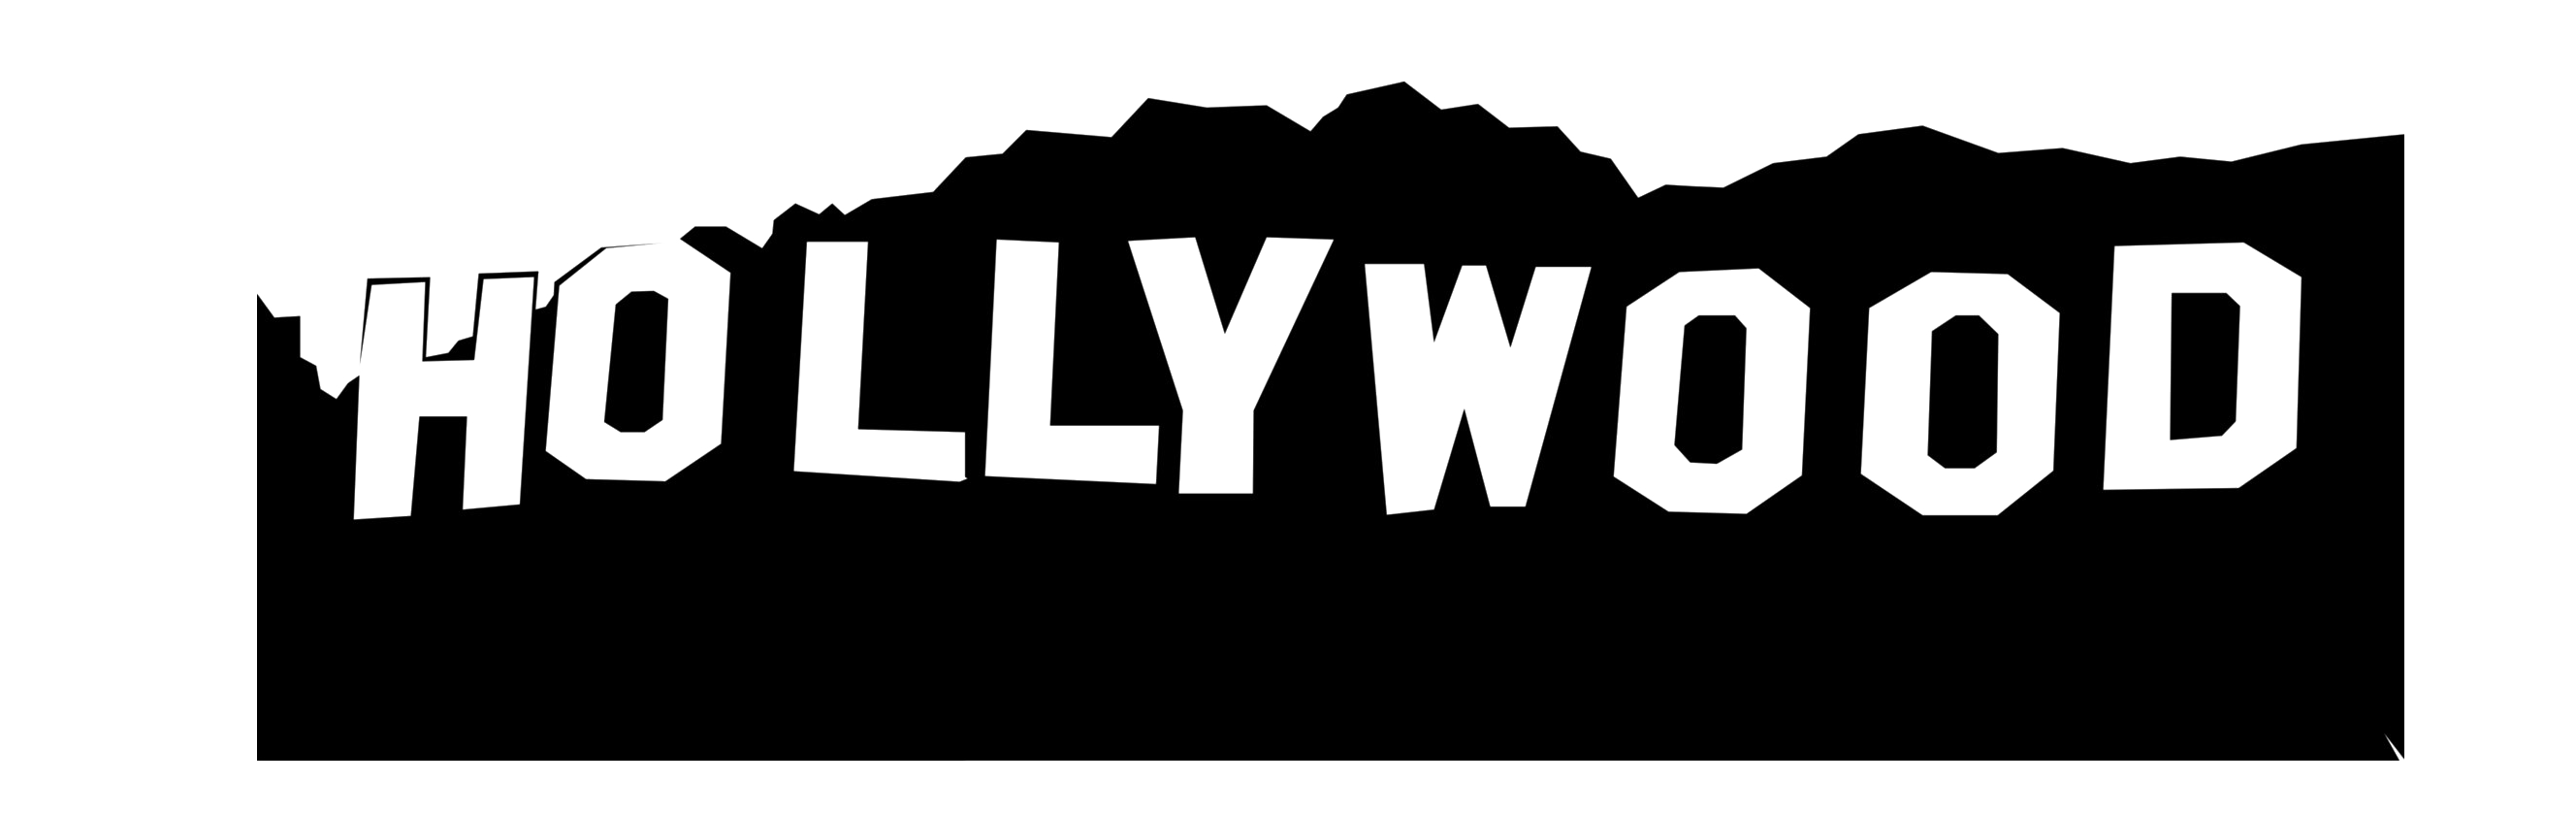 Hollywood Sign PNG Best Image - Hollywood Sign Png